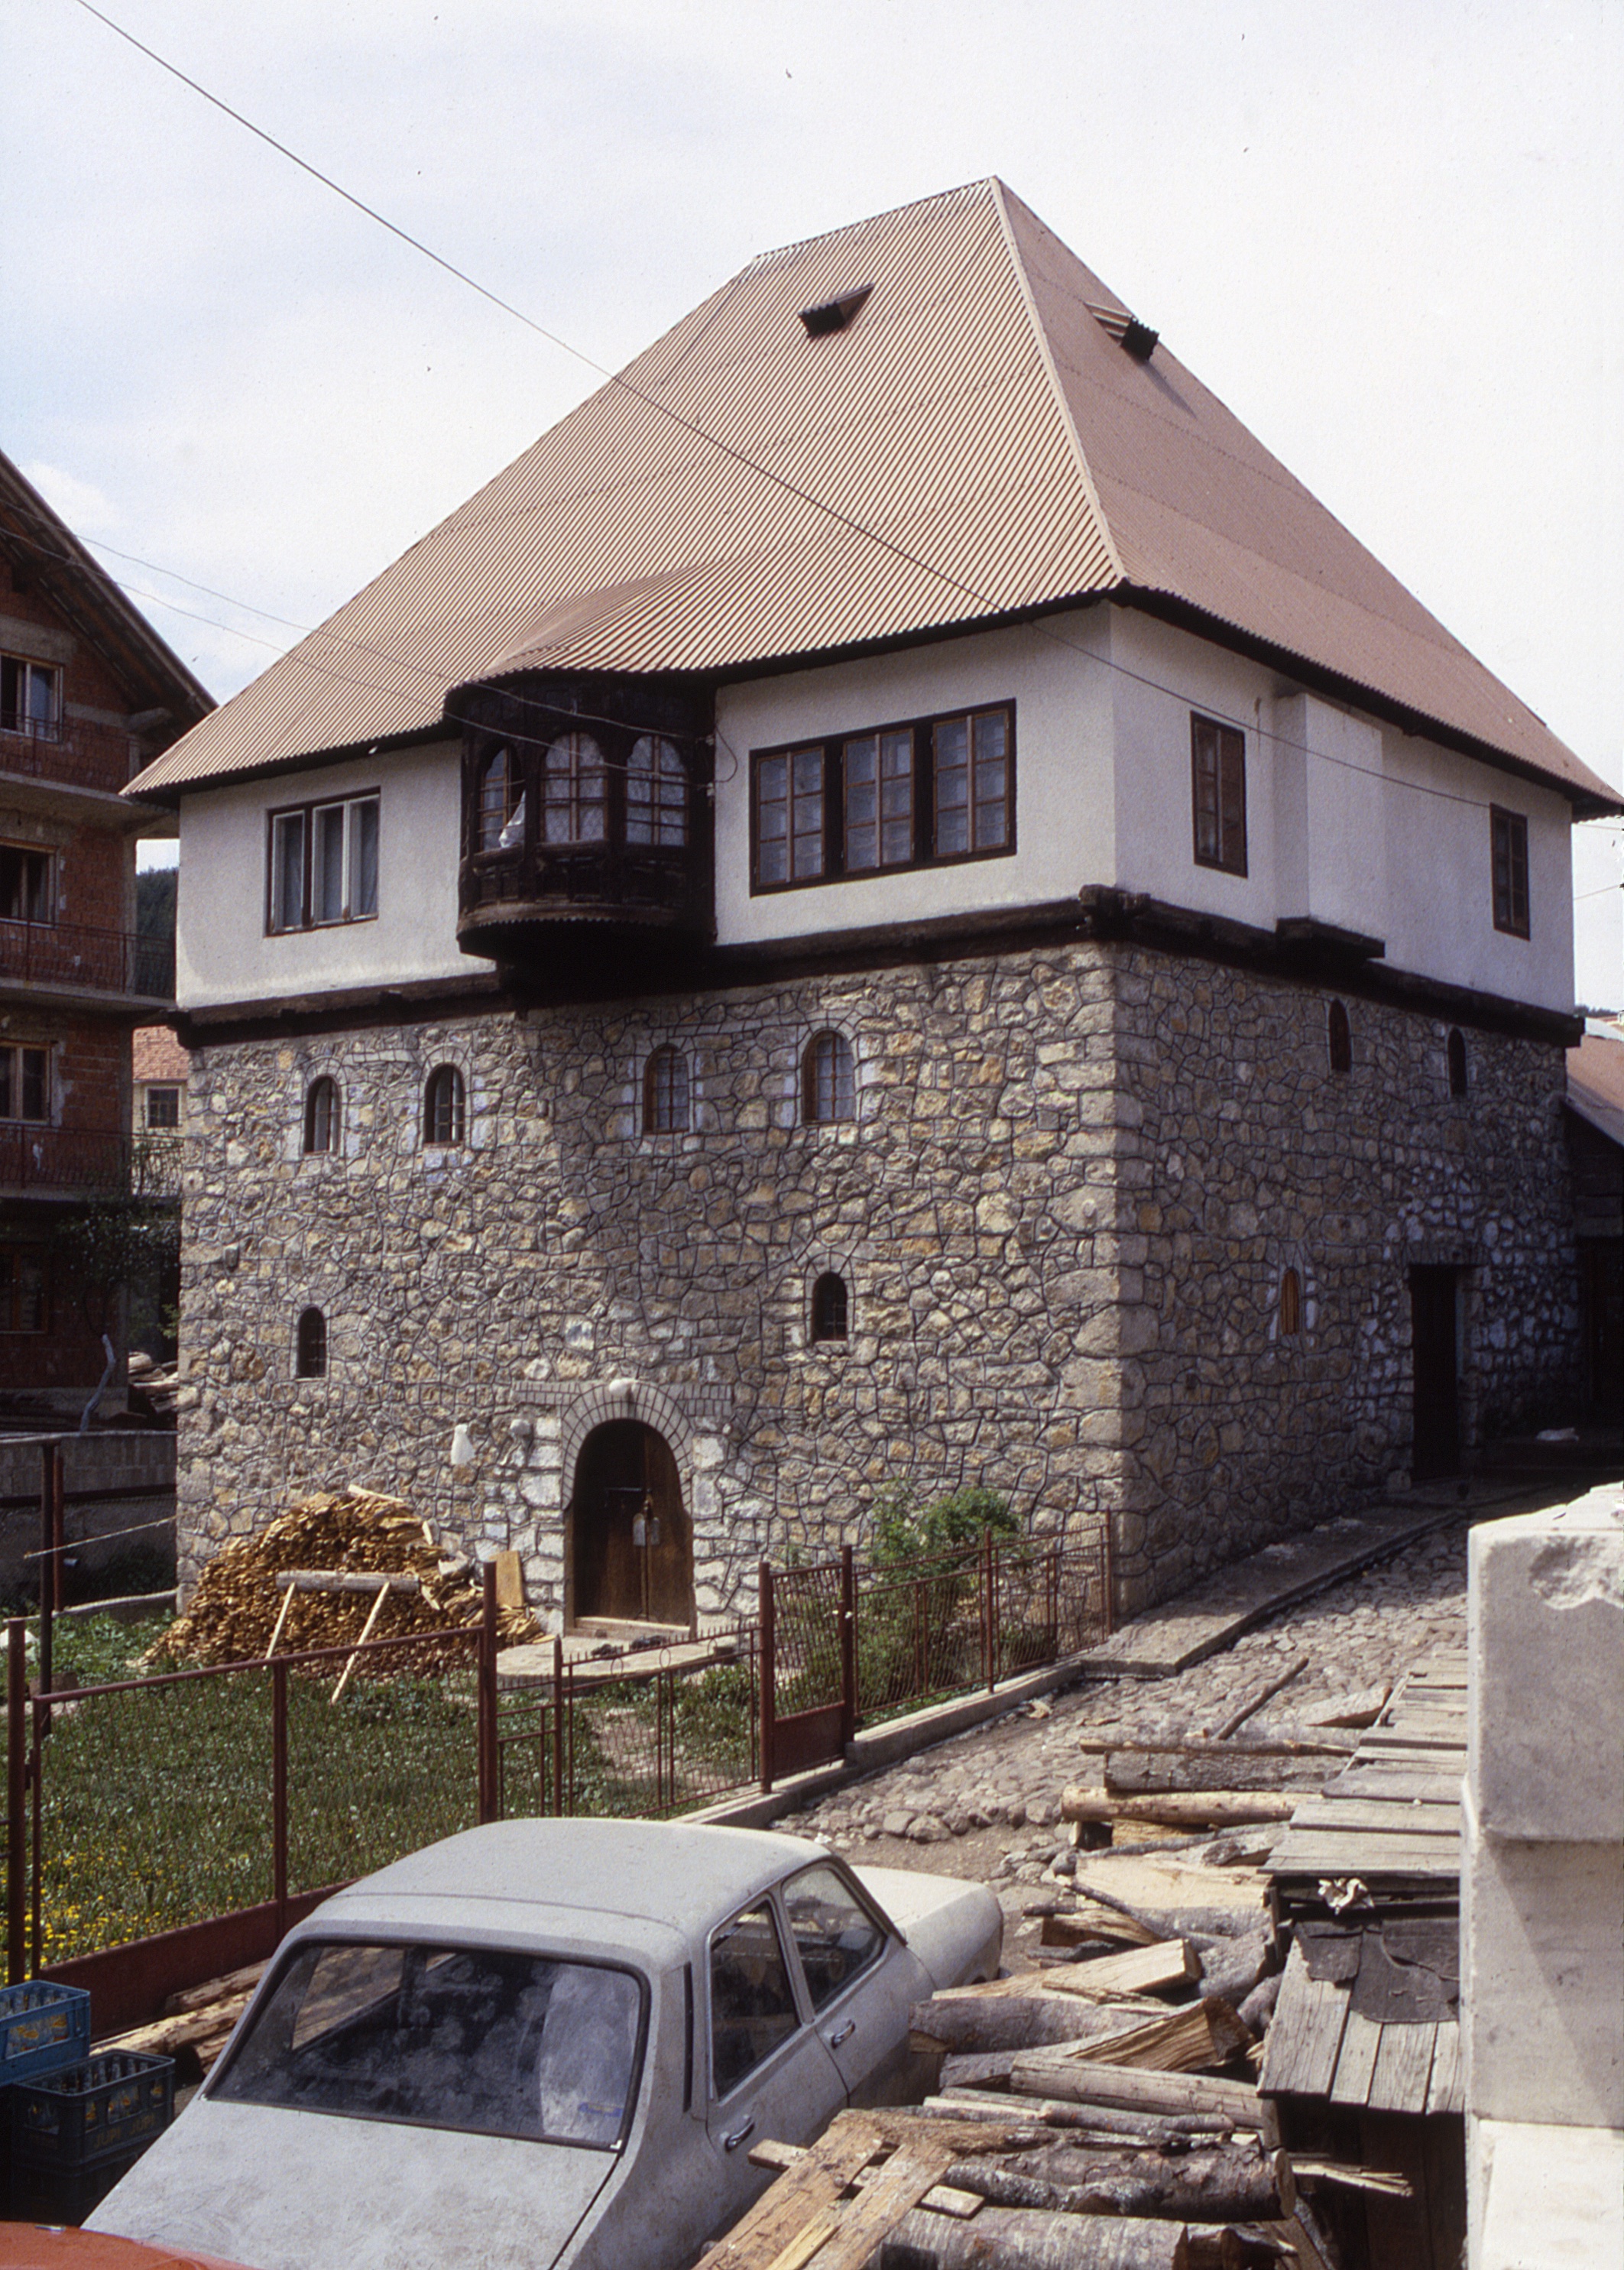 <p>This large kula with ground entrances on two levels is under renovation. The lowest level walls are constructed of stone with three major coursed strips of stone and arch-shaped stonework over window openings. The top level floor, walls and roof framing are timber. These walls were constructed using infill of wattle and daub covered with plaster. The oriel window appears to have a raised floor as in čardak spaces. The steep roof is covered with corrugated panels. The small opens in the roof are typical of those found in traditional dwellings and used to ventilate the building. </p>